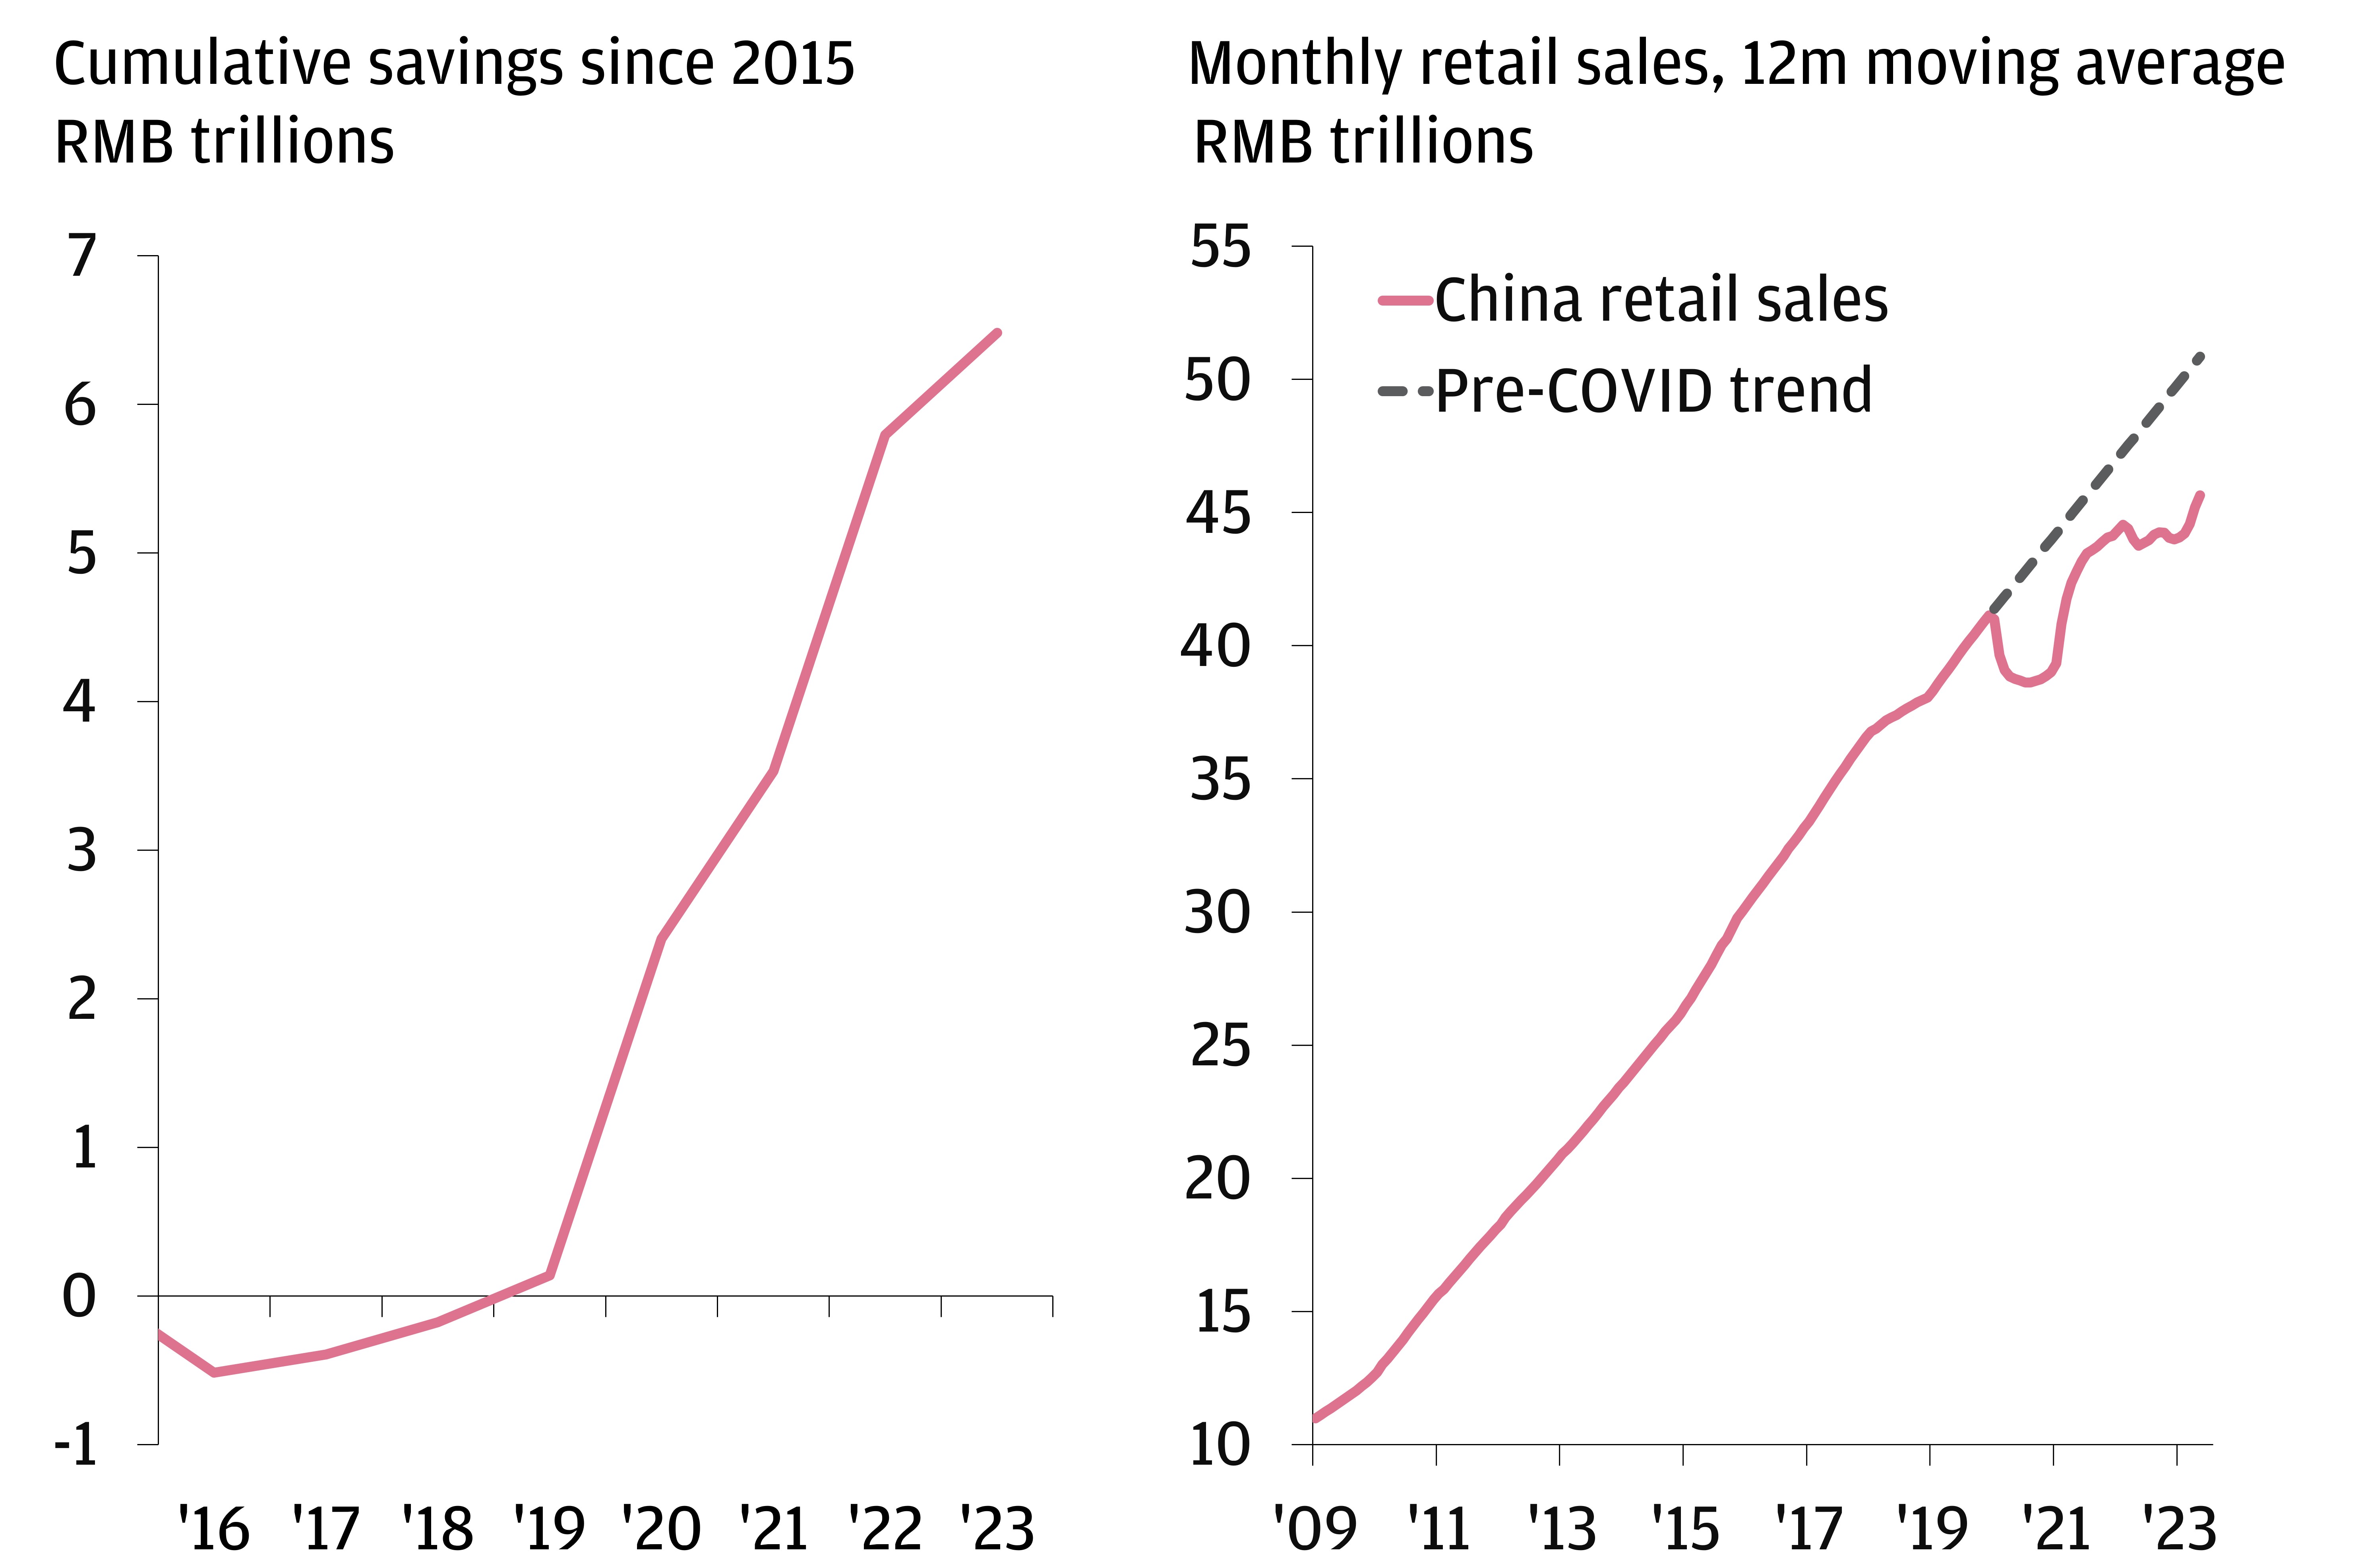 The chart on the left shows the cumulative savings since 2016 of Chinese consumers in trillions of RMB.